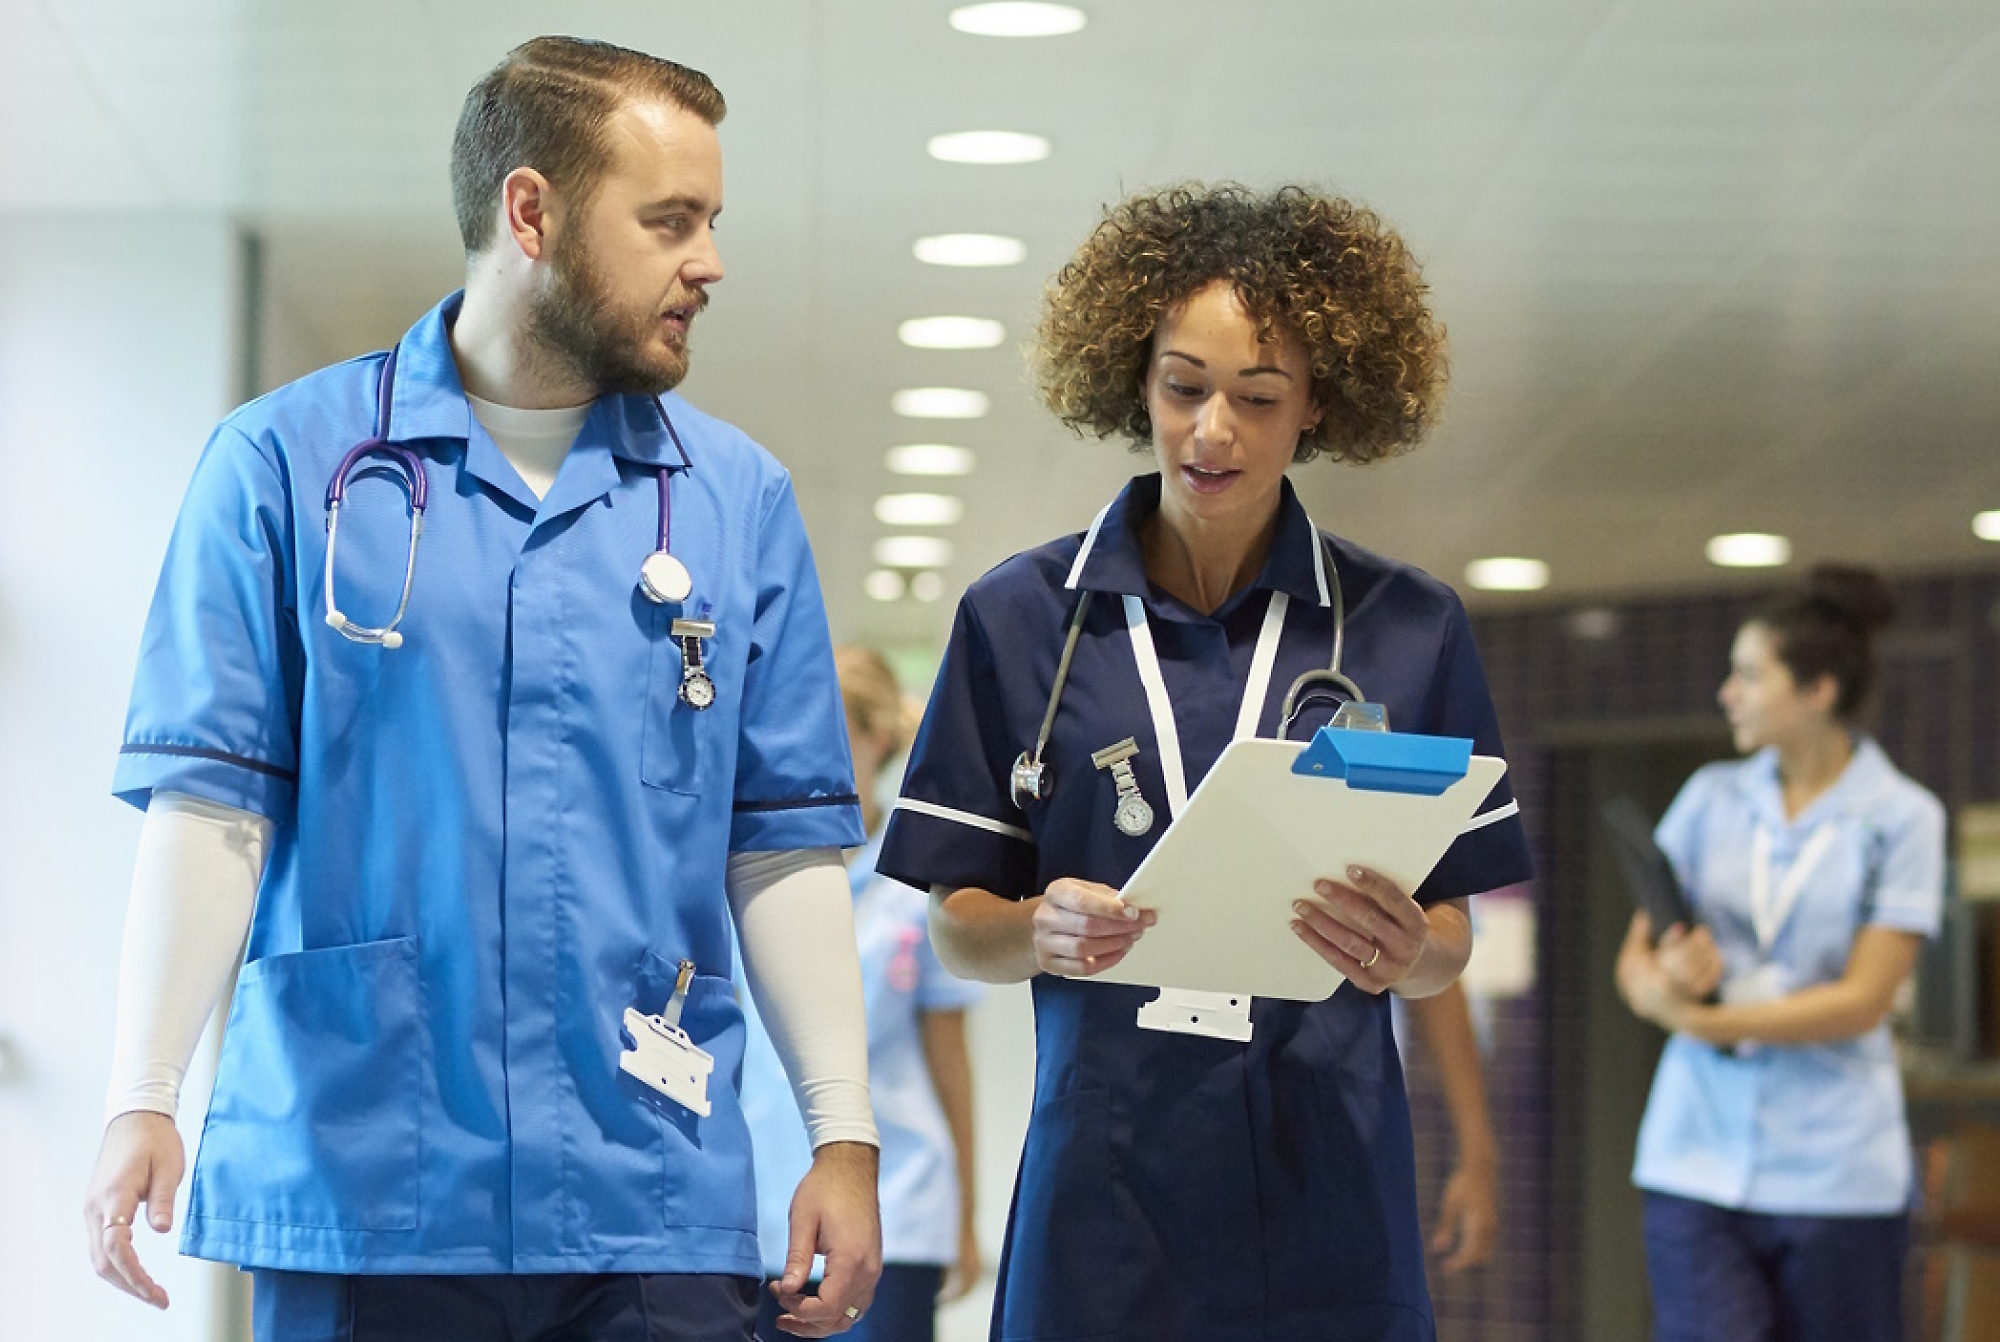 Two healthcare professionals in blue uniforms talking and walking in a hospital corridor, with one holding a clipboard. 